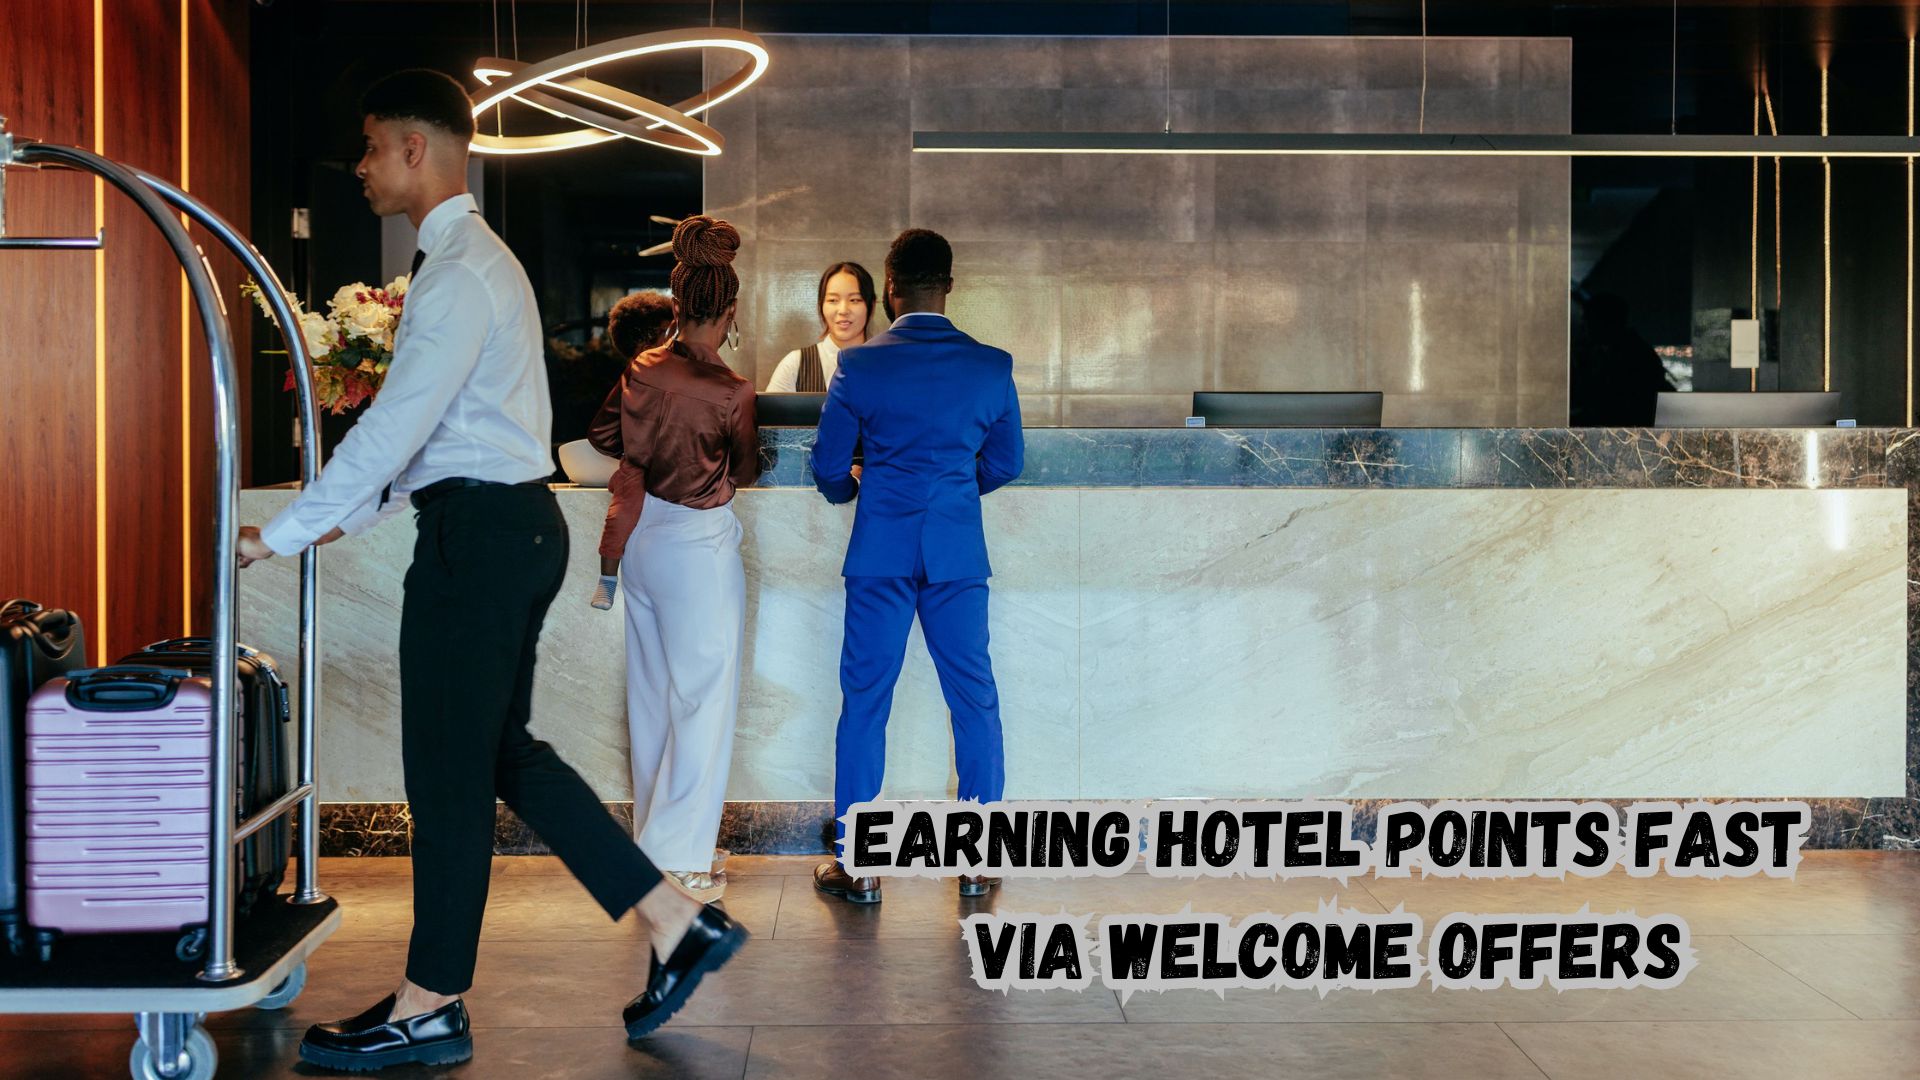 Earning Hotel Points Fast via Welcome Offers.